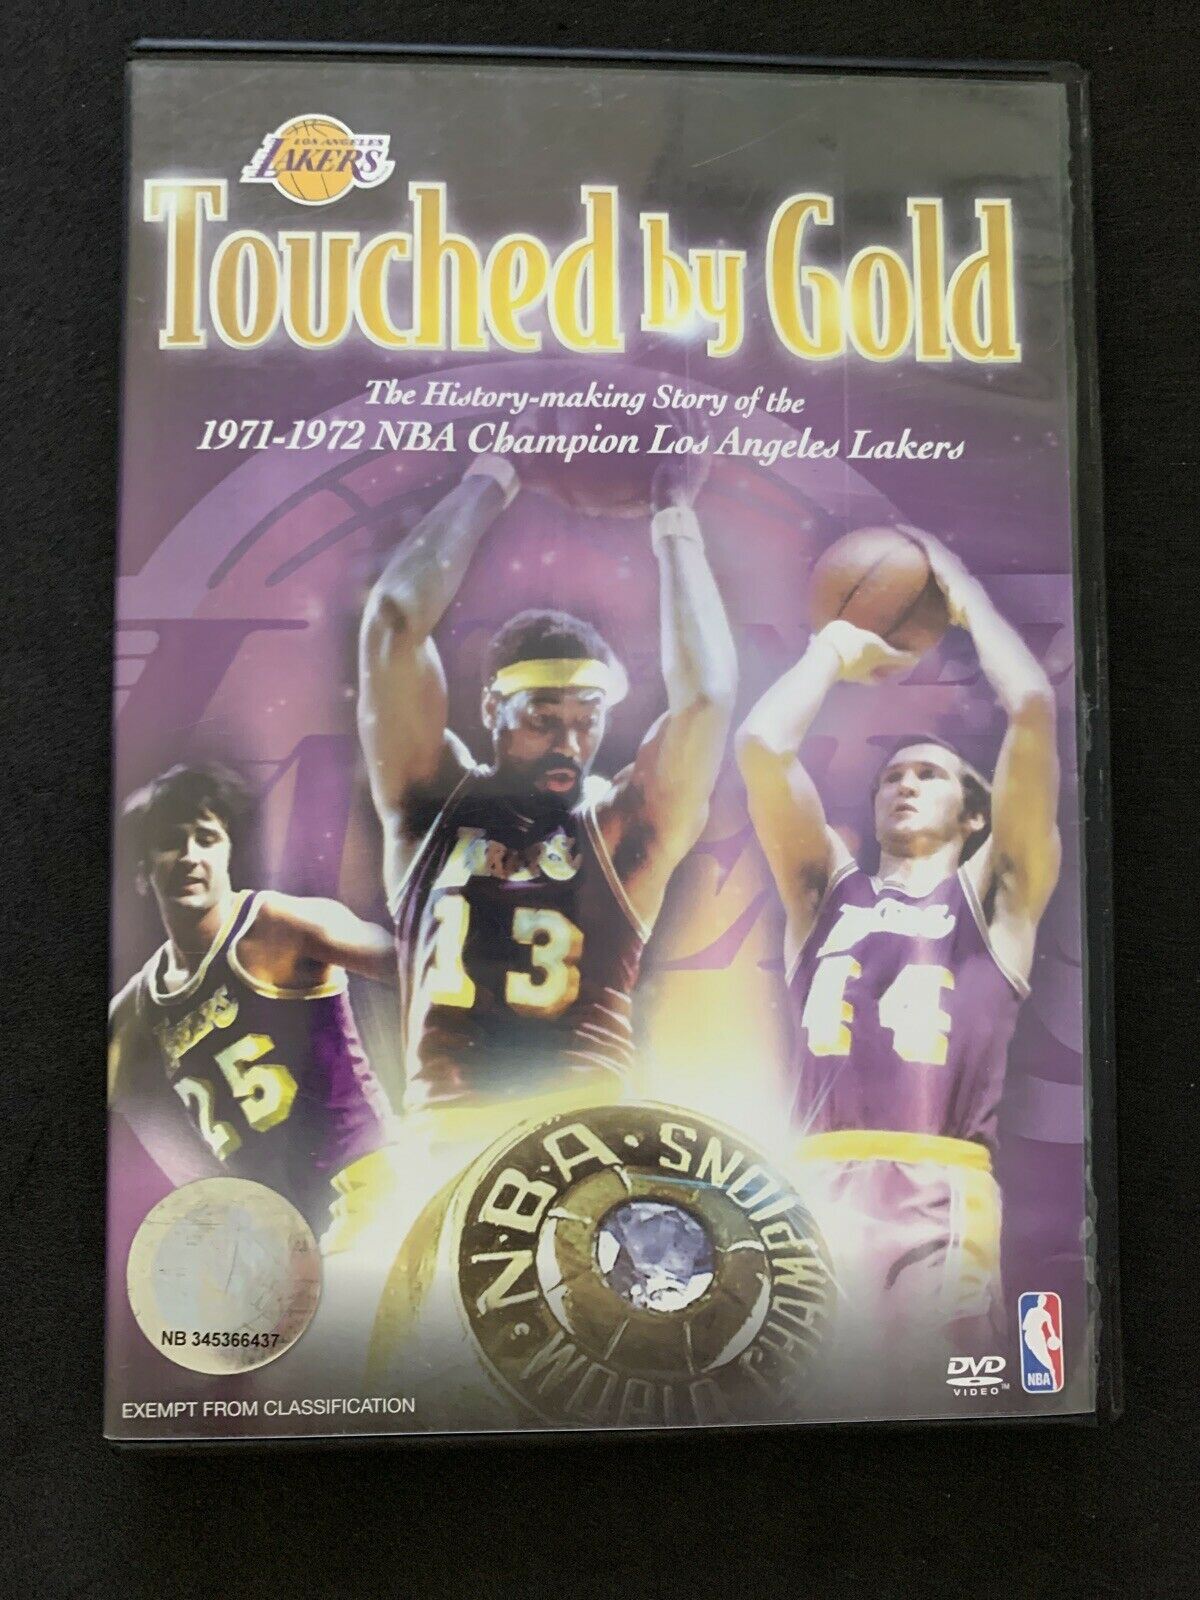 NBA - Los Angeles Lakers 1971-72 Touched By Gold DVD Region 4